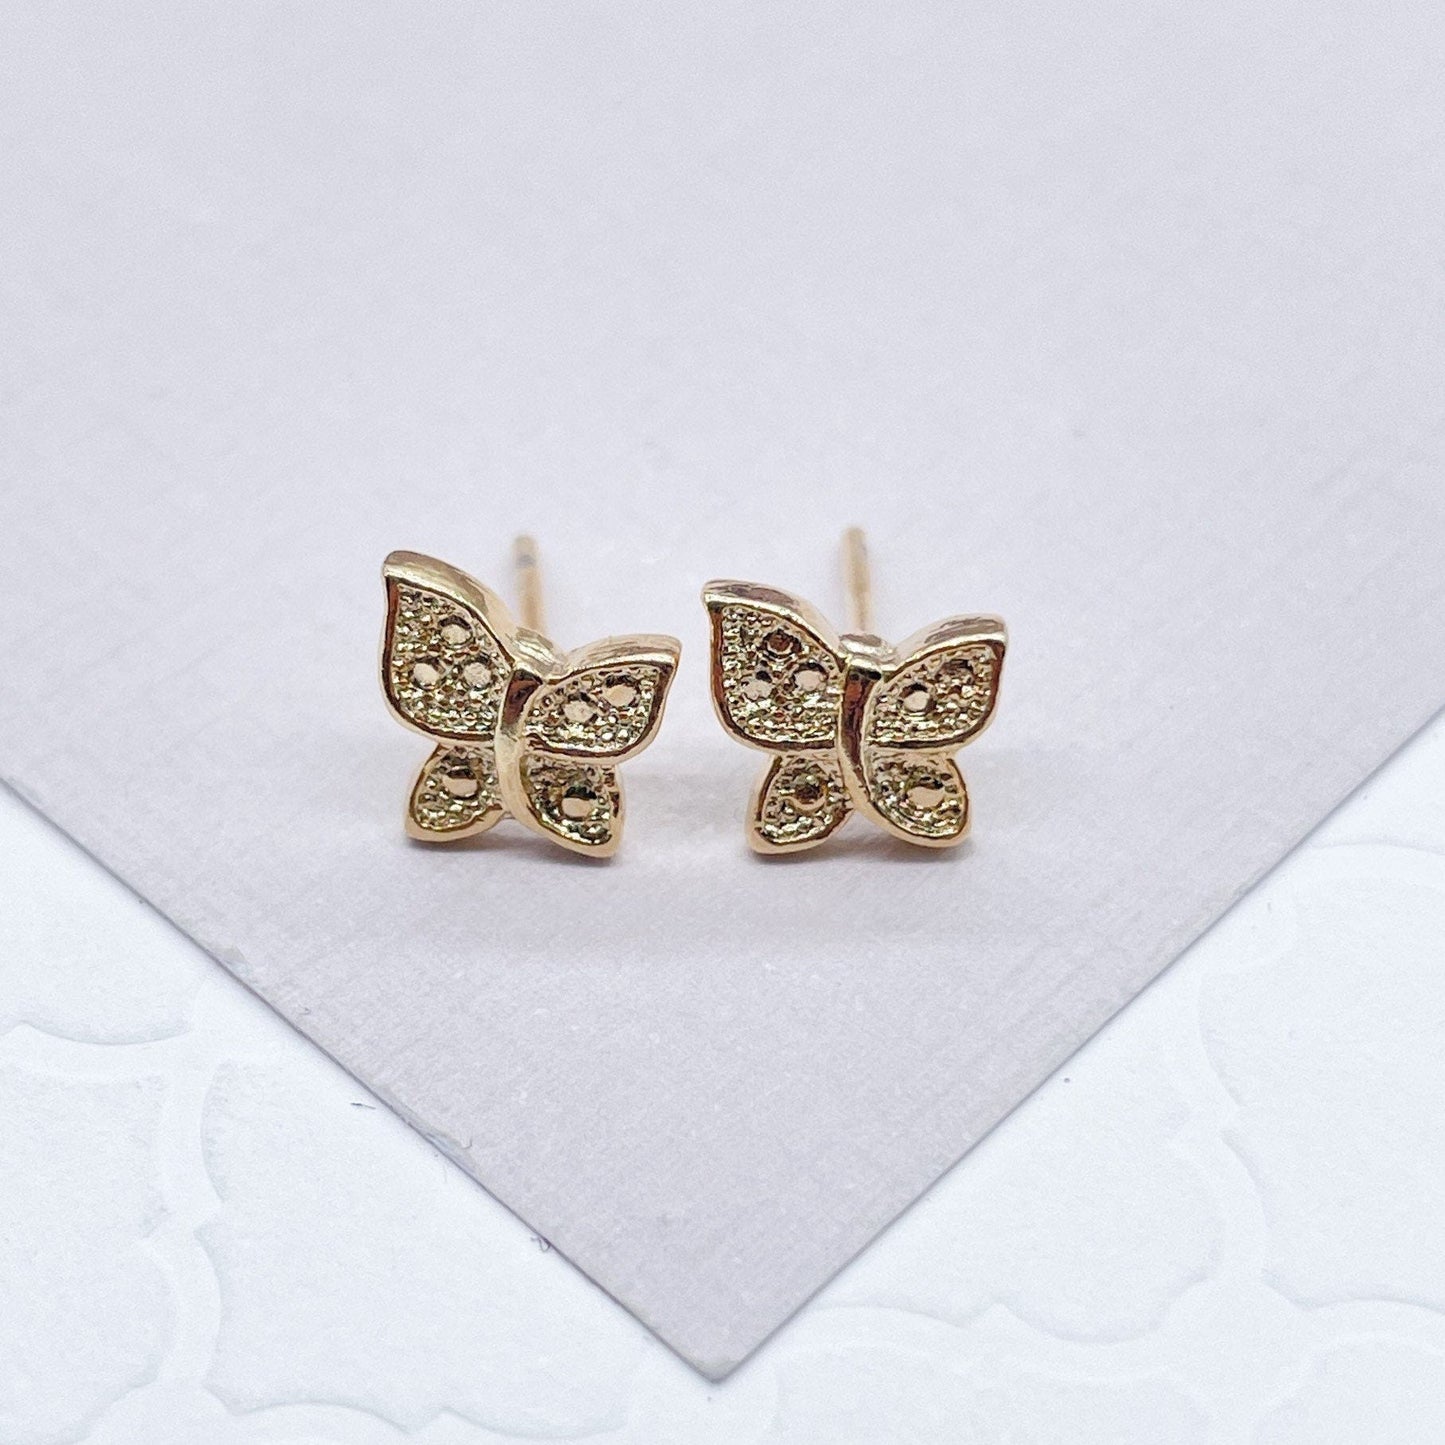 18k Gold Layered Small Butterfly Stud Earrings Dainty Jewelry Featuring Design